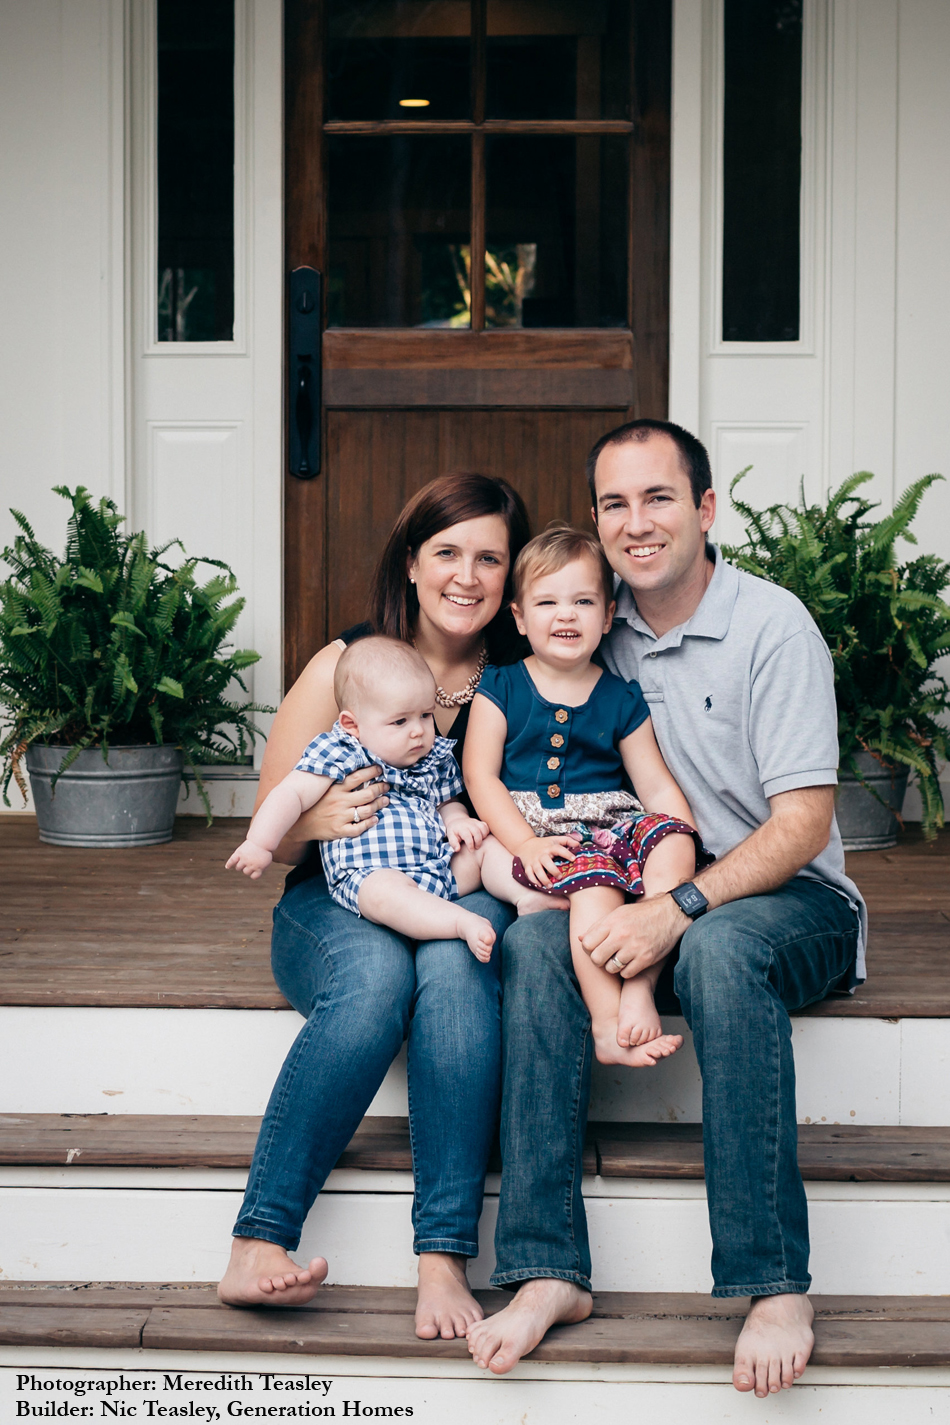 Meet Nic Teasley of Generation Homes › Nelson Design Group